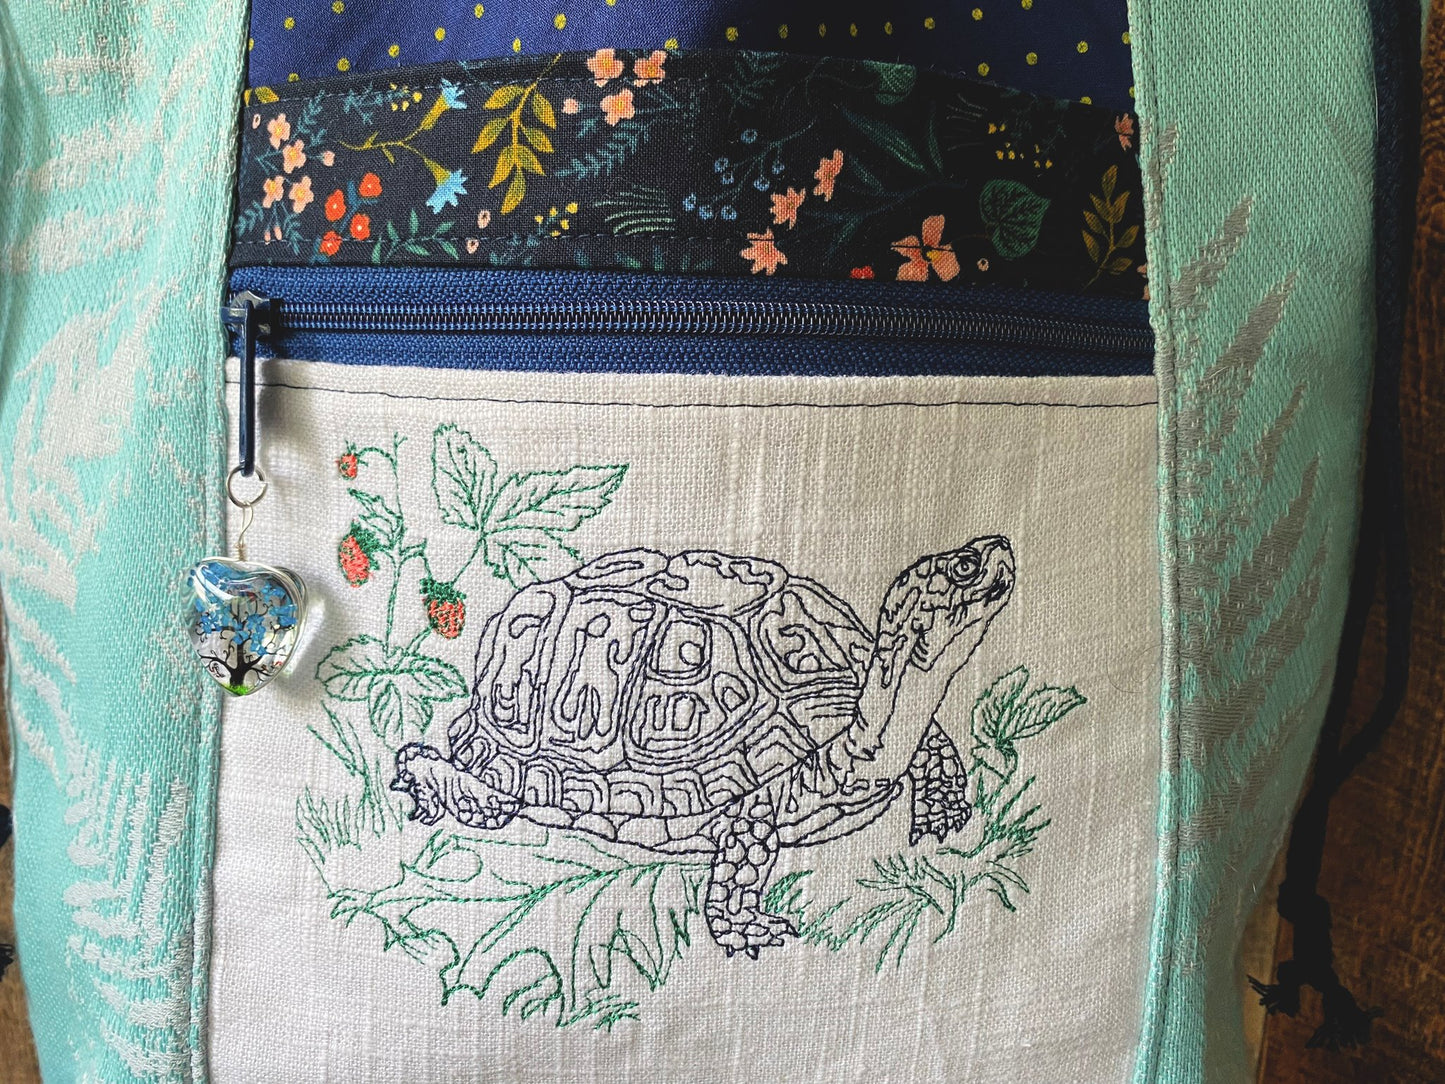 Box Turtle Large Firefly Project Bag